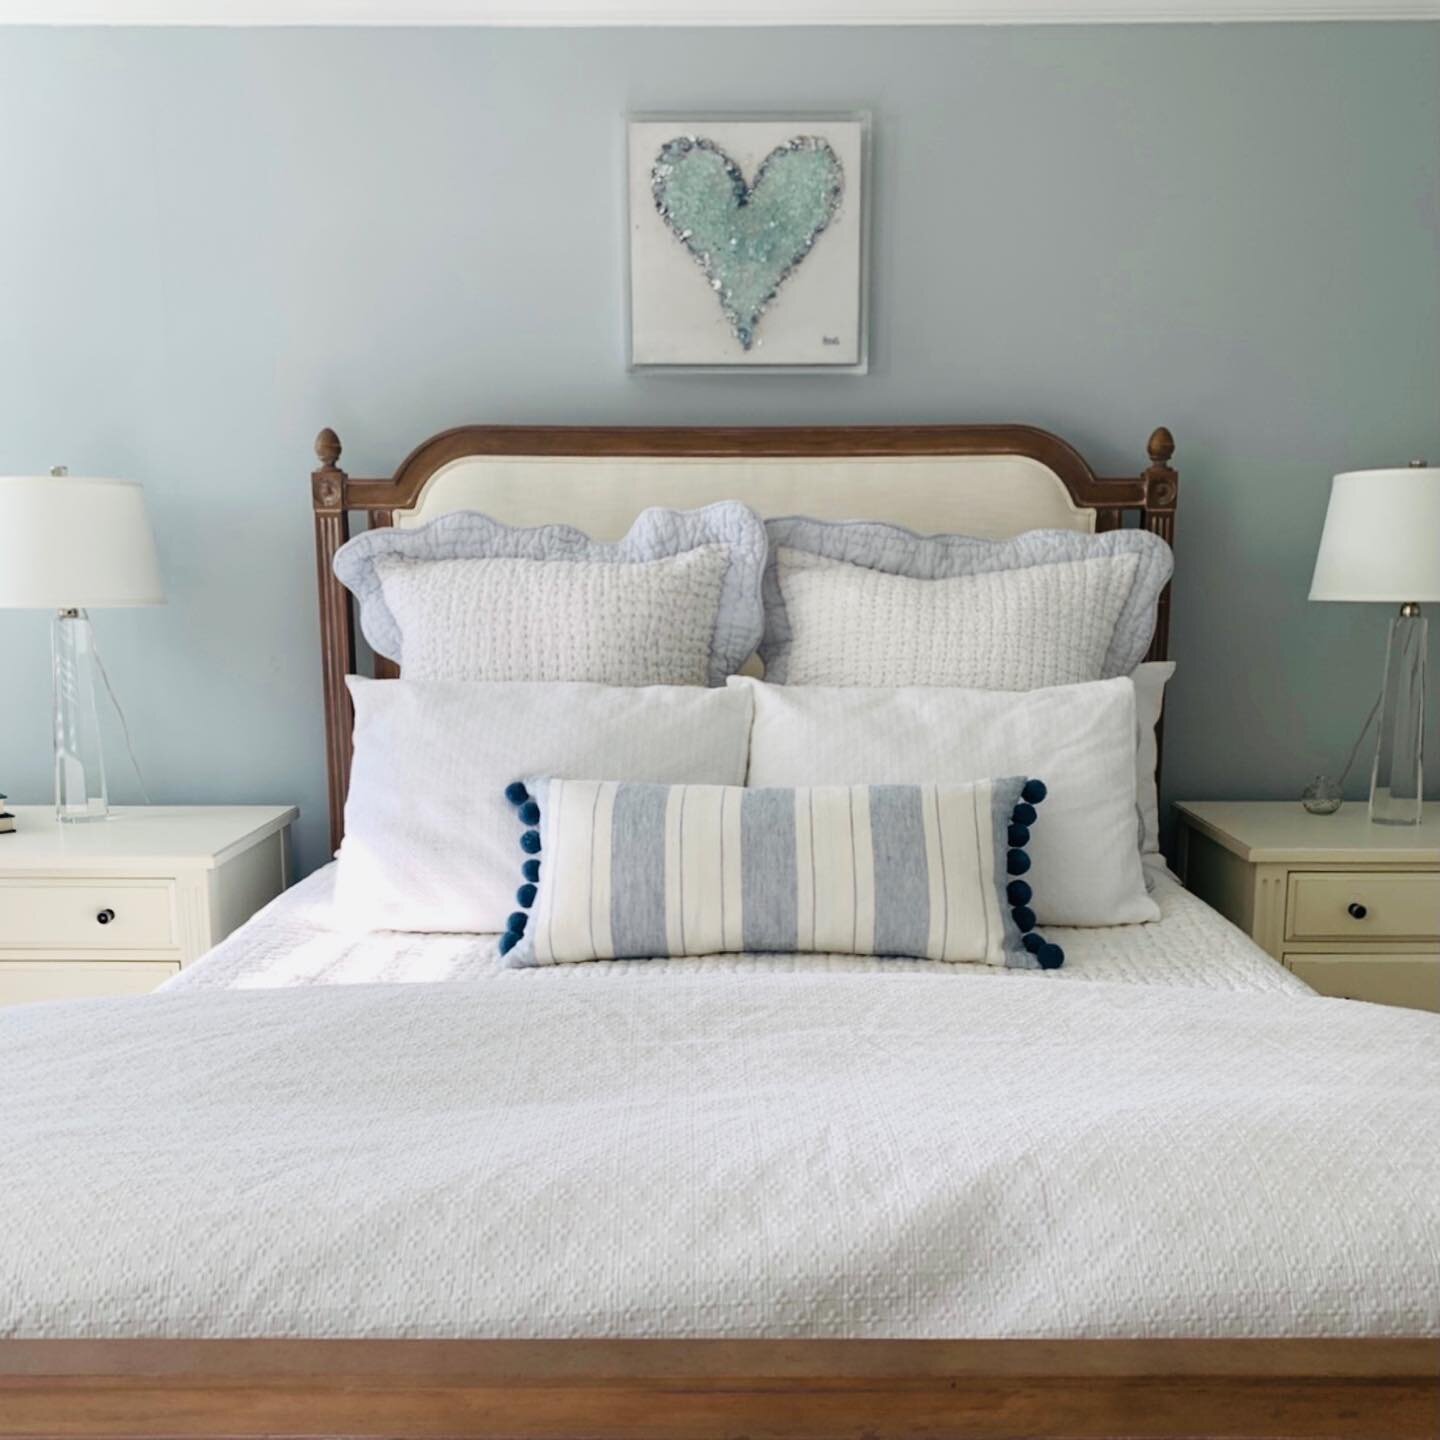 I don&rsquo;t know about you, but I&rsquo;ve always been a huge fan of light blues and whites mixed together in a bedroom. (Or any room for that matter 😉) There&rsquo;s something about these cool, serene tones that create a soothing atmosphere perfe